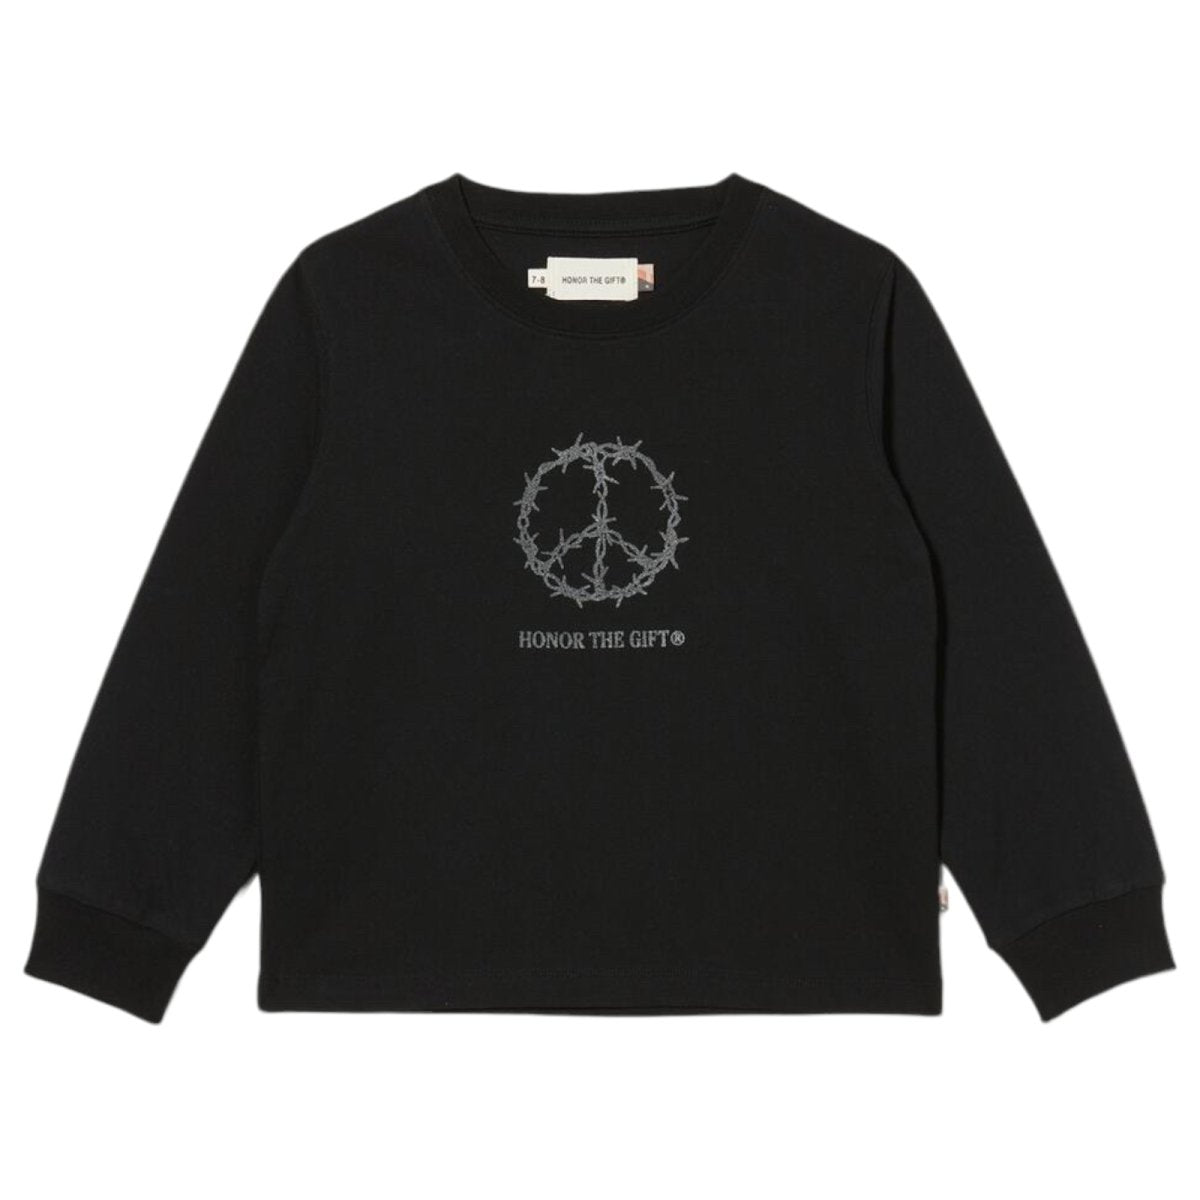 PEACE SIGN LONG SLEEVE TSHIRT - SWEATERS